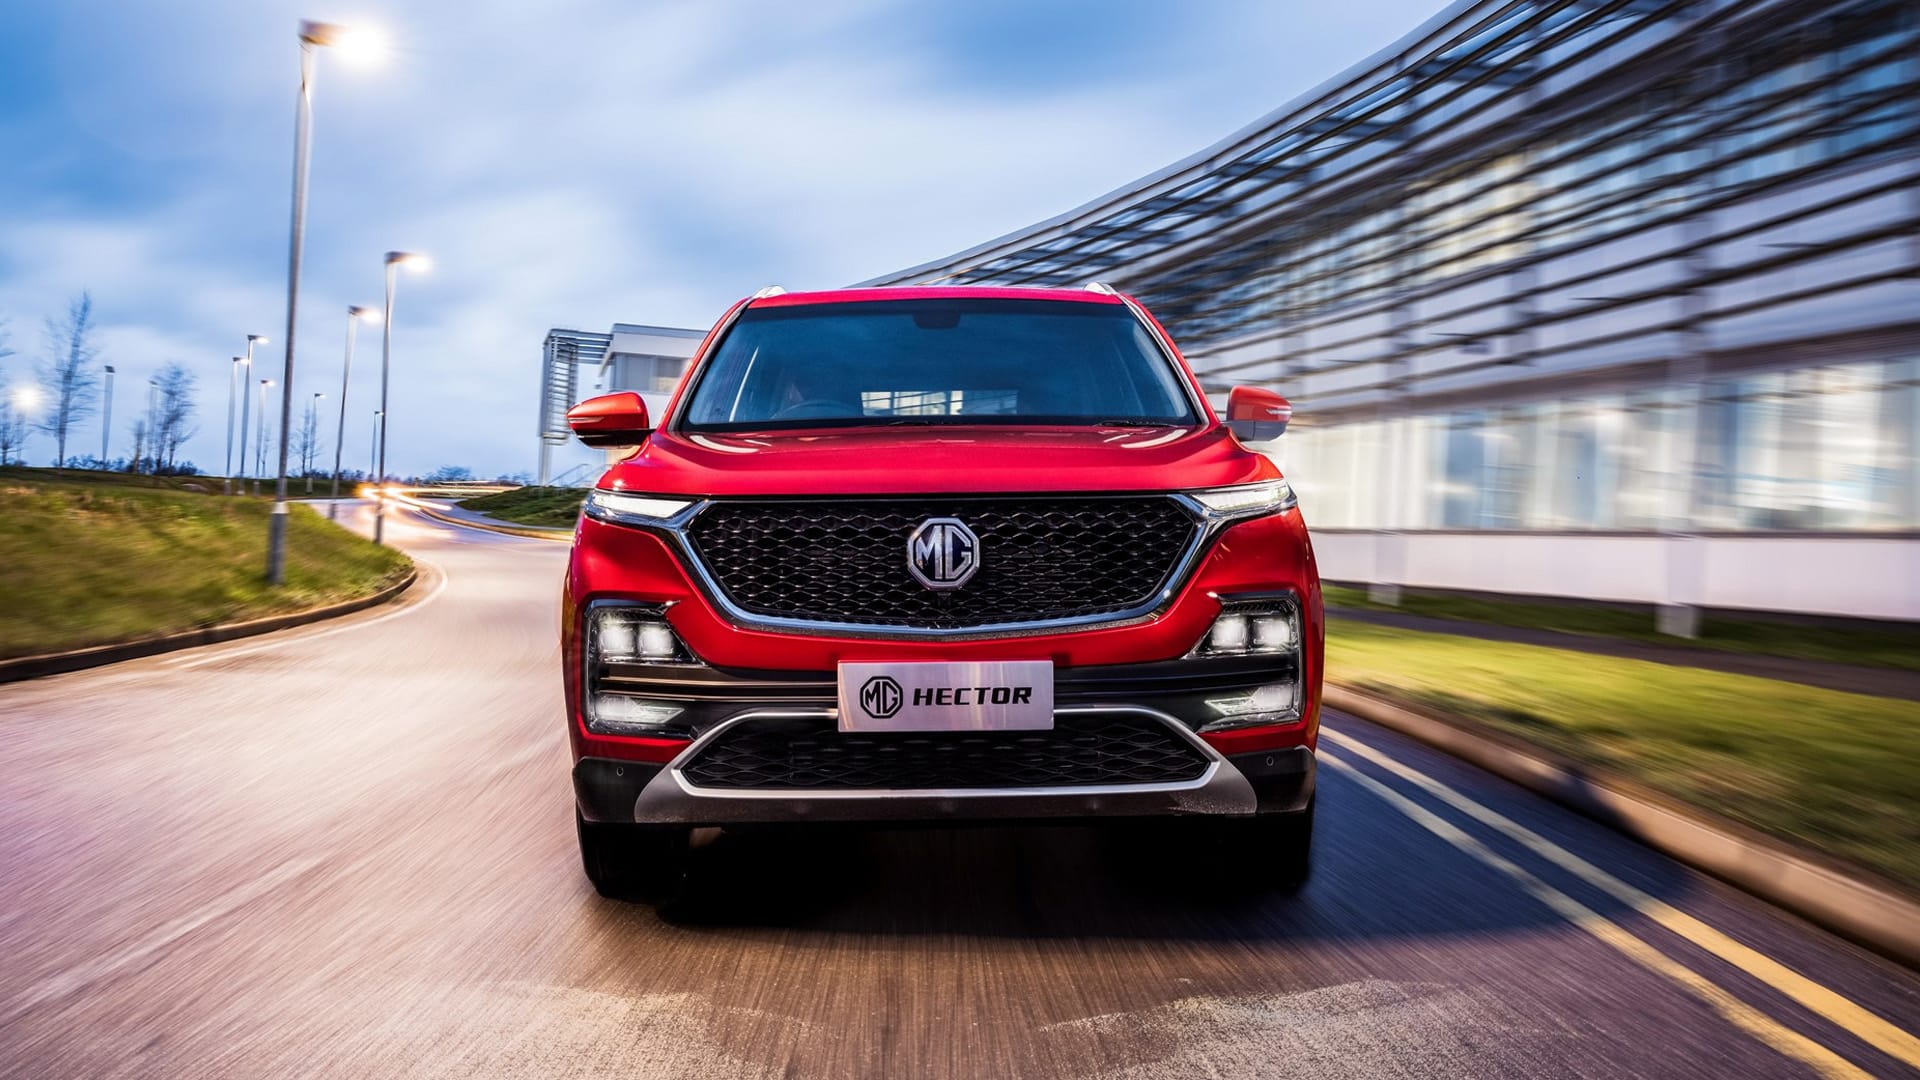 MG Motor reports 51 pc rise in retail sales at 4,315 units for August